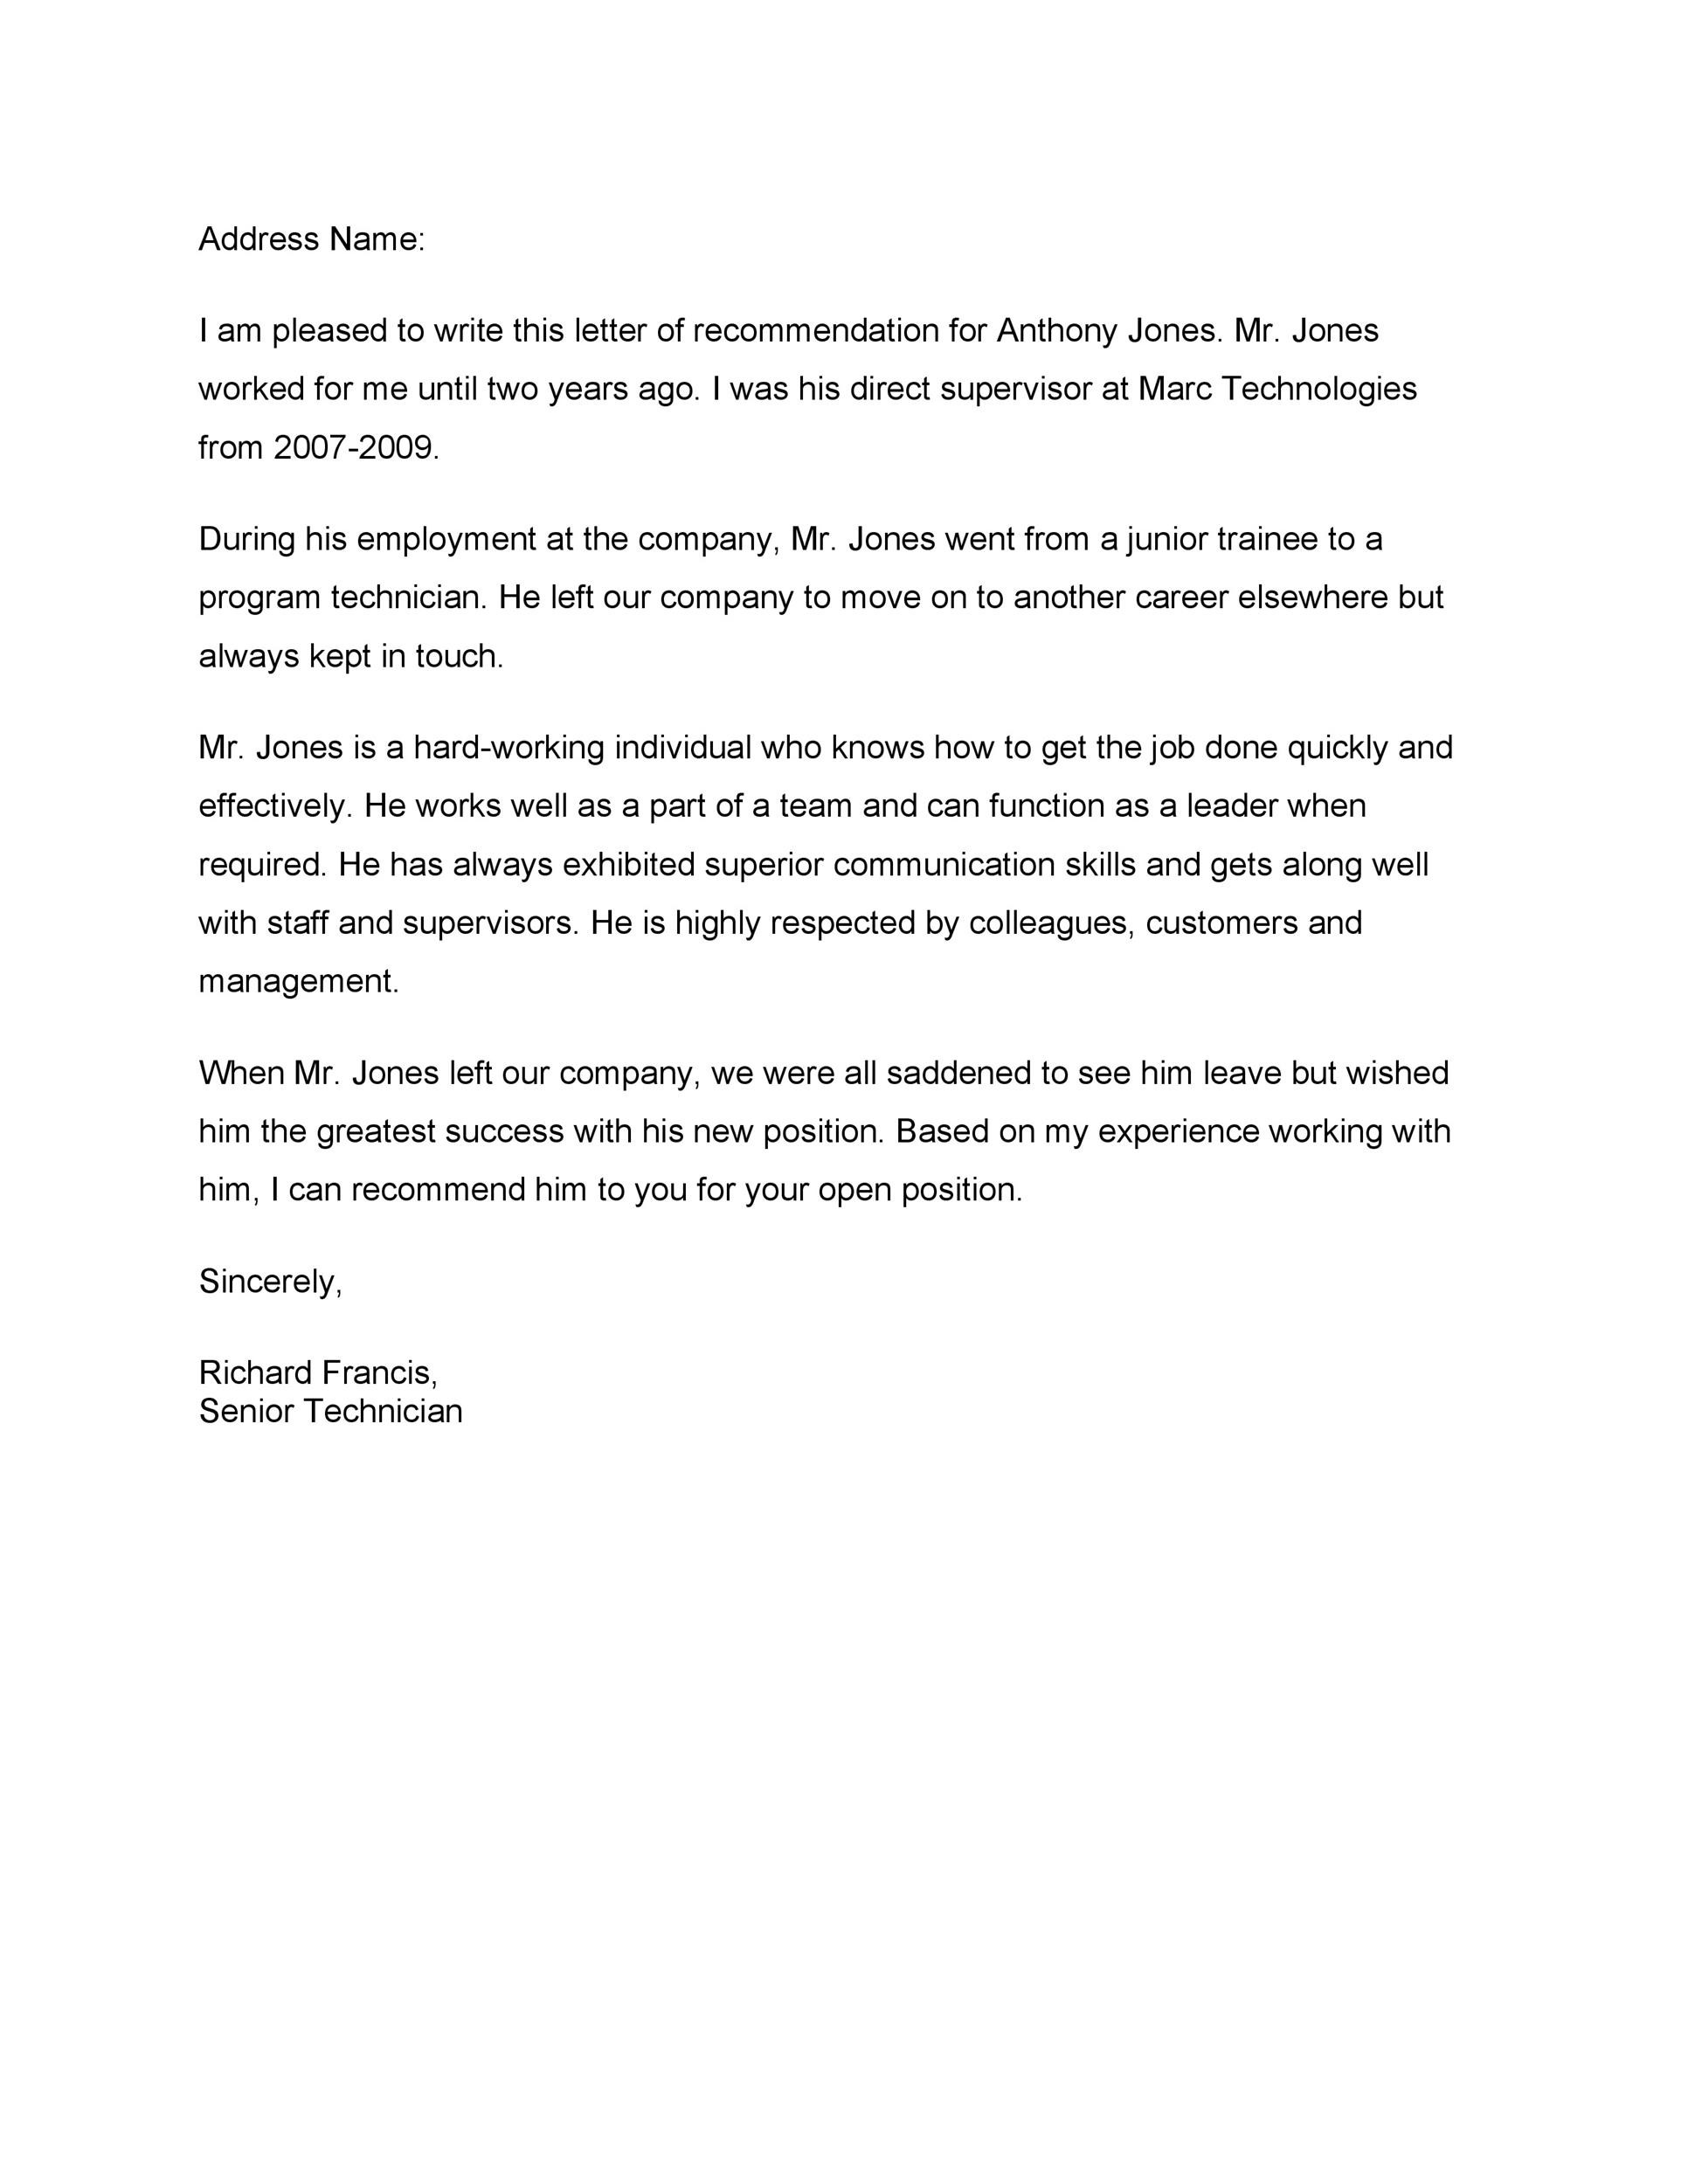 Letter Of Recommendation Template For Employment from templatelab.com